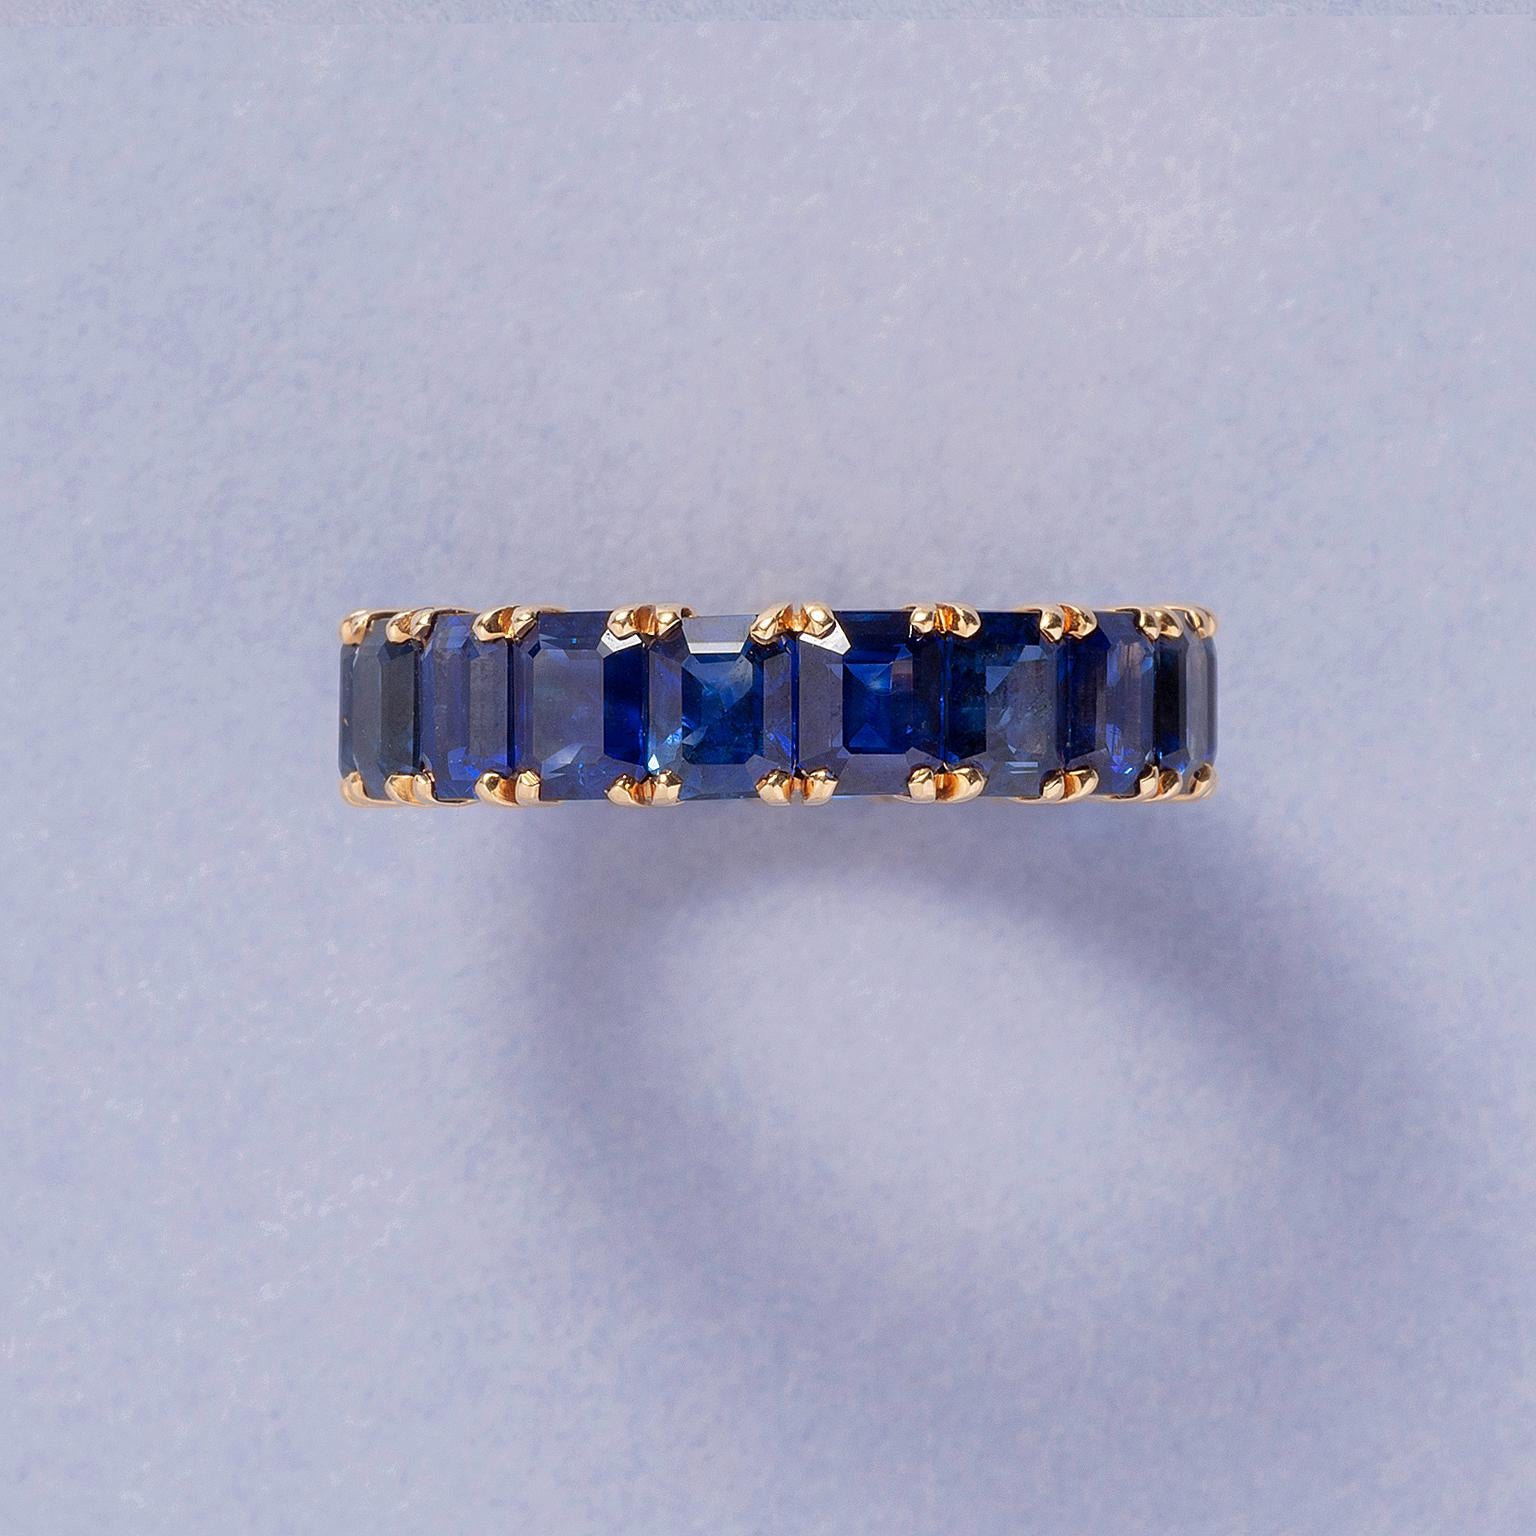 A stunning 18 carat yellow gold eternity ring set with 18 deep blue emerald-cut dark, deep and vivid blue natural  heated and unheated sapphires that are held by four claw chatons (app. 0.75 carat x 18 is app. 18.5 carat in total, NEL certifcate